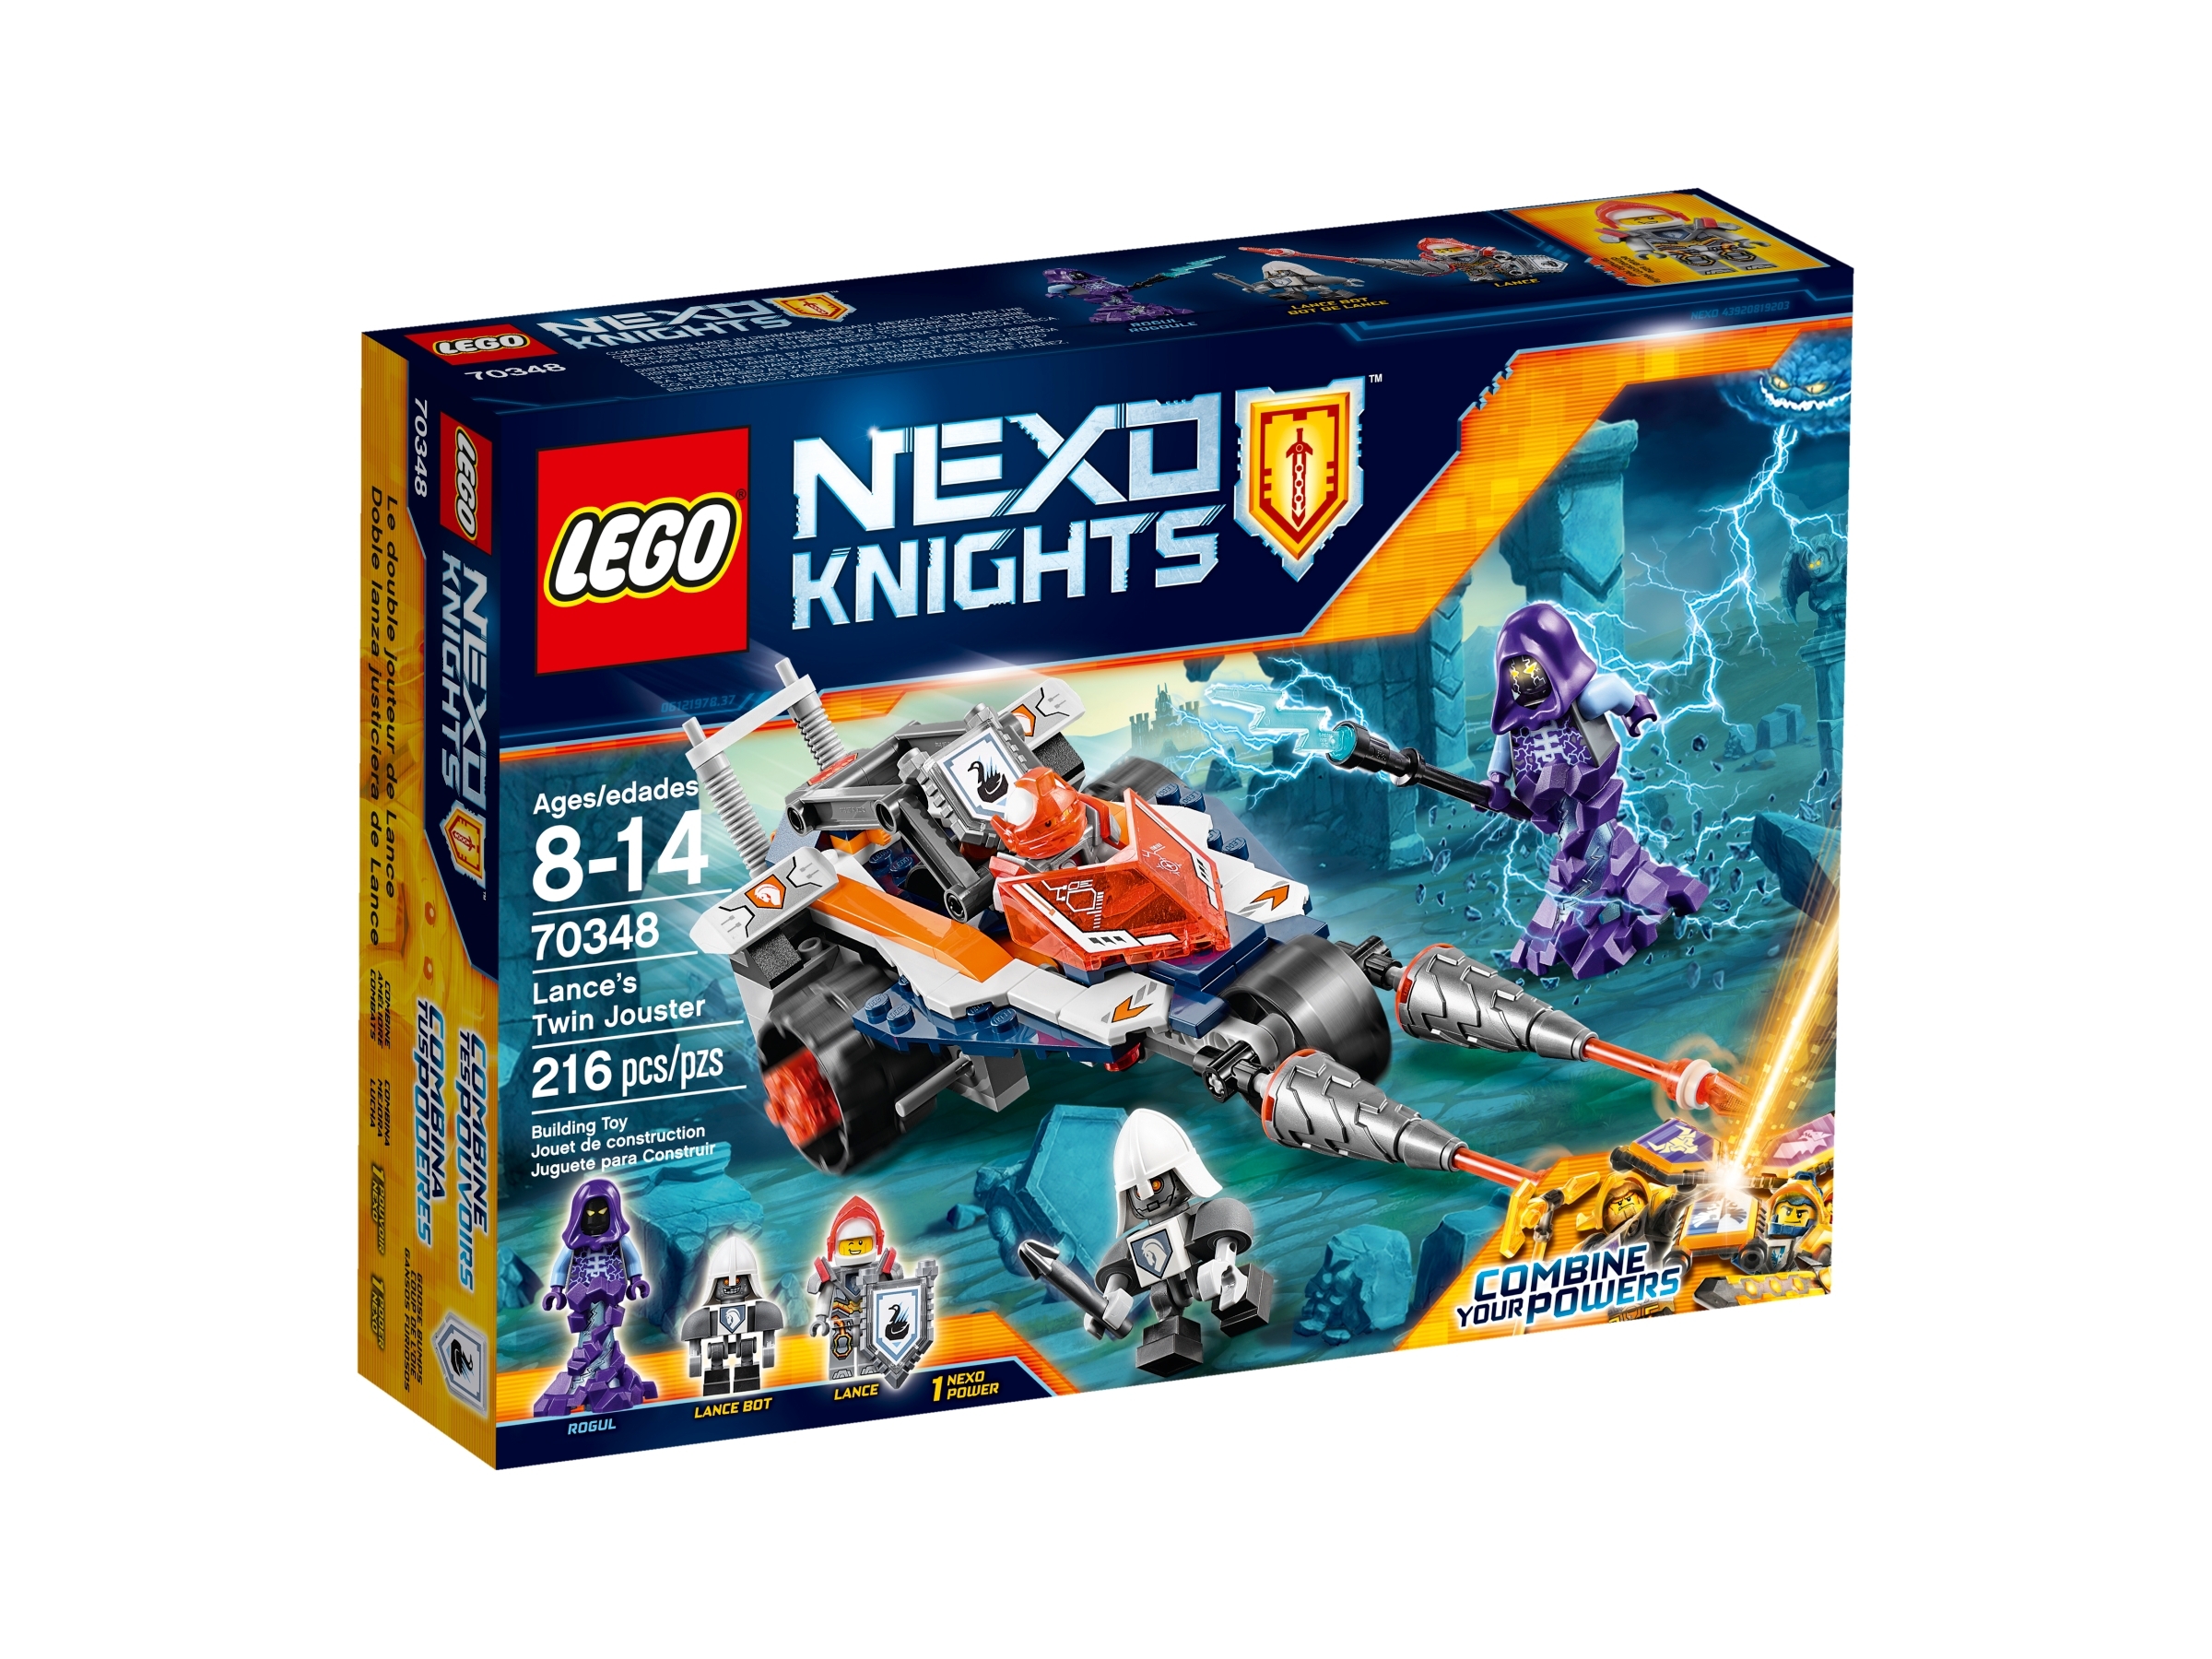 Lance's Twin Jouster 70348 | NEXO KNIGHTS™ | online at the Official LEGO® Shop US